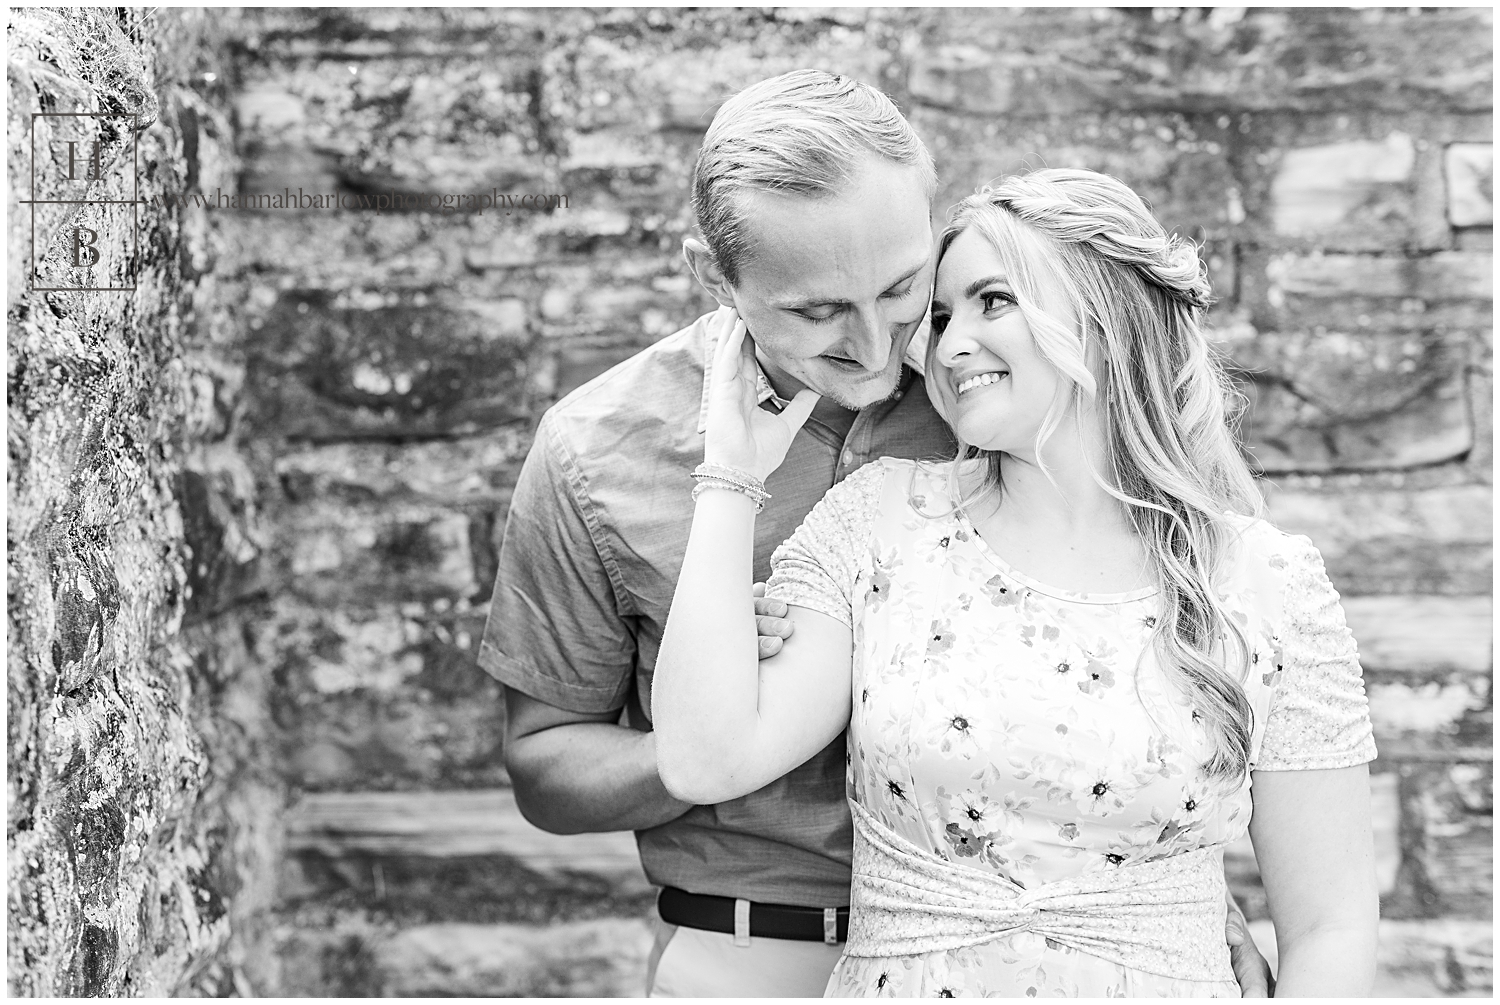 Man stands behind fiancé and embraces her in black and white engagement photo.